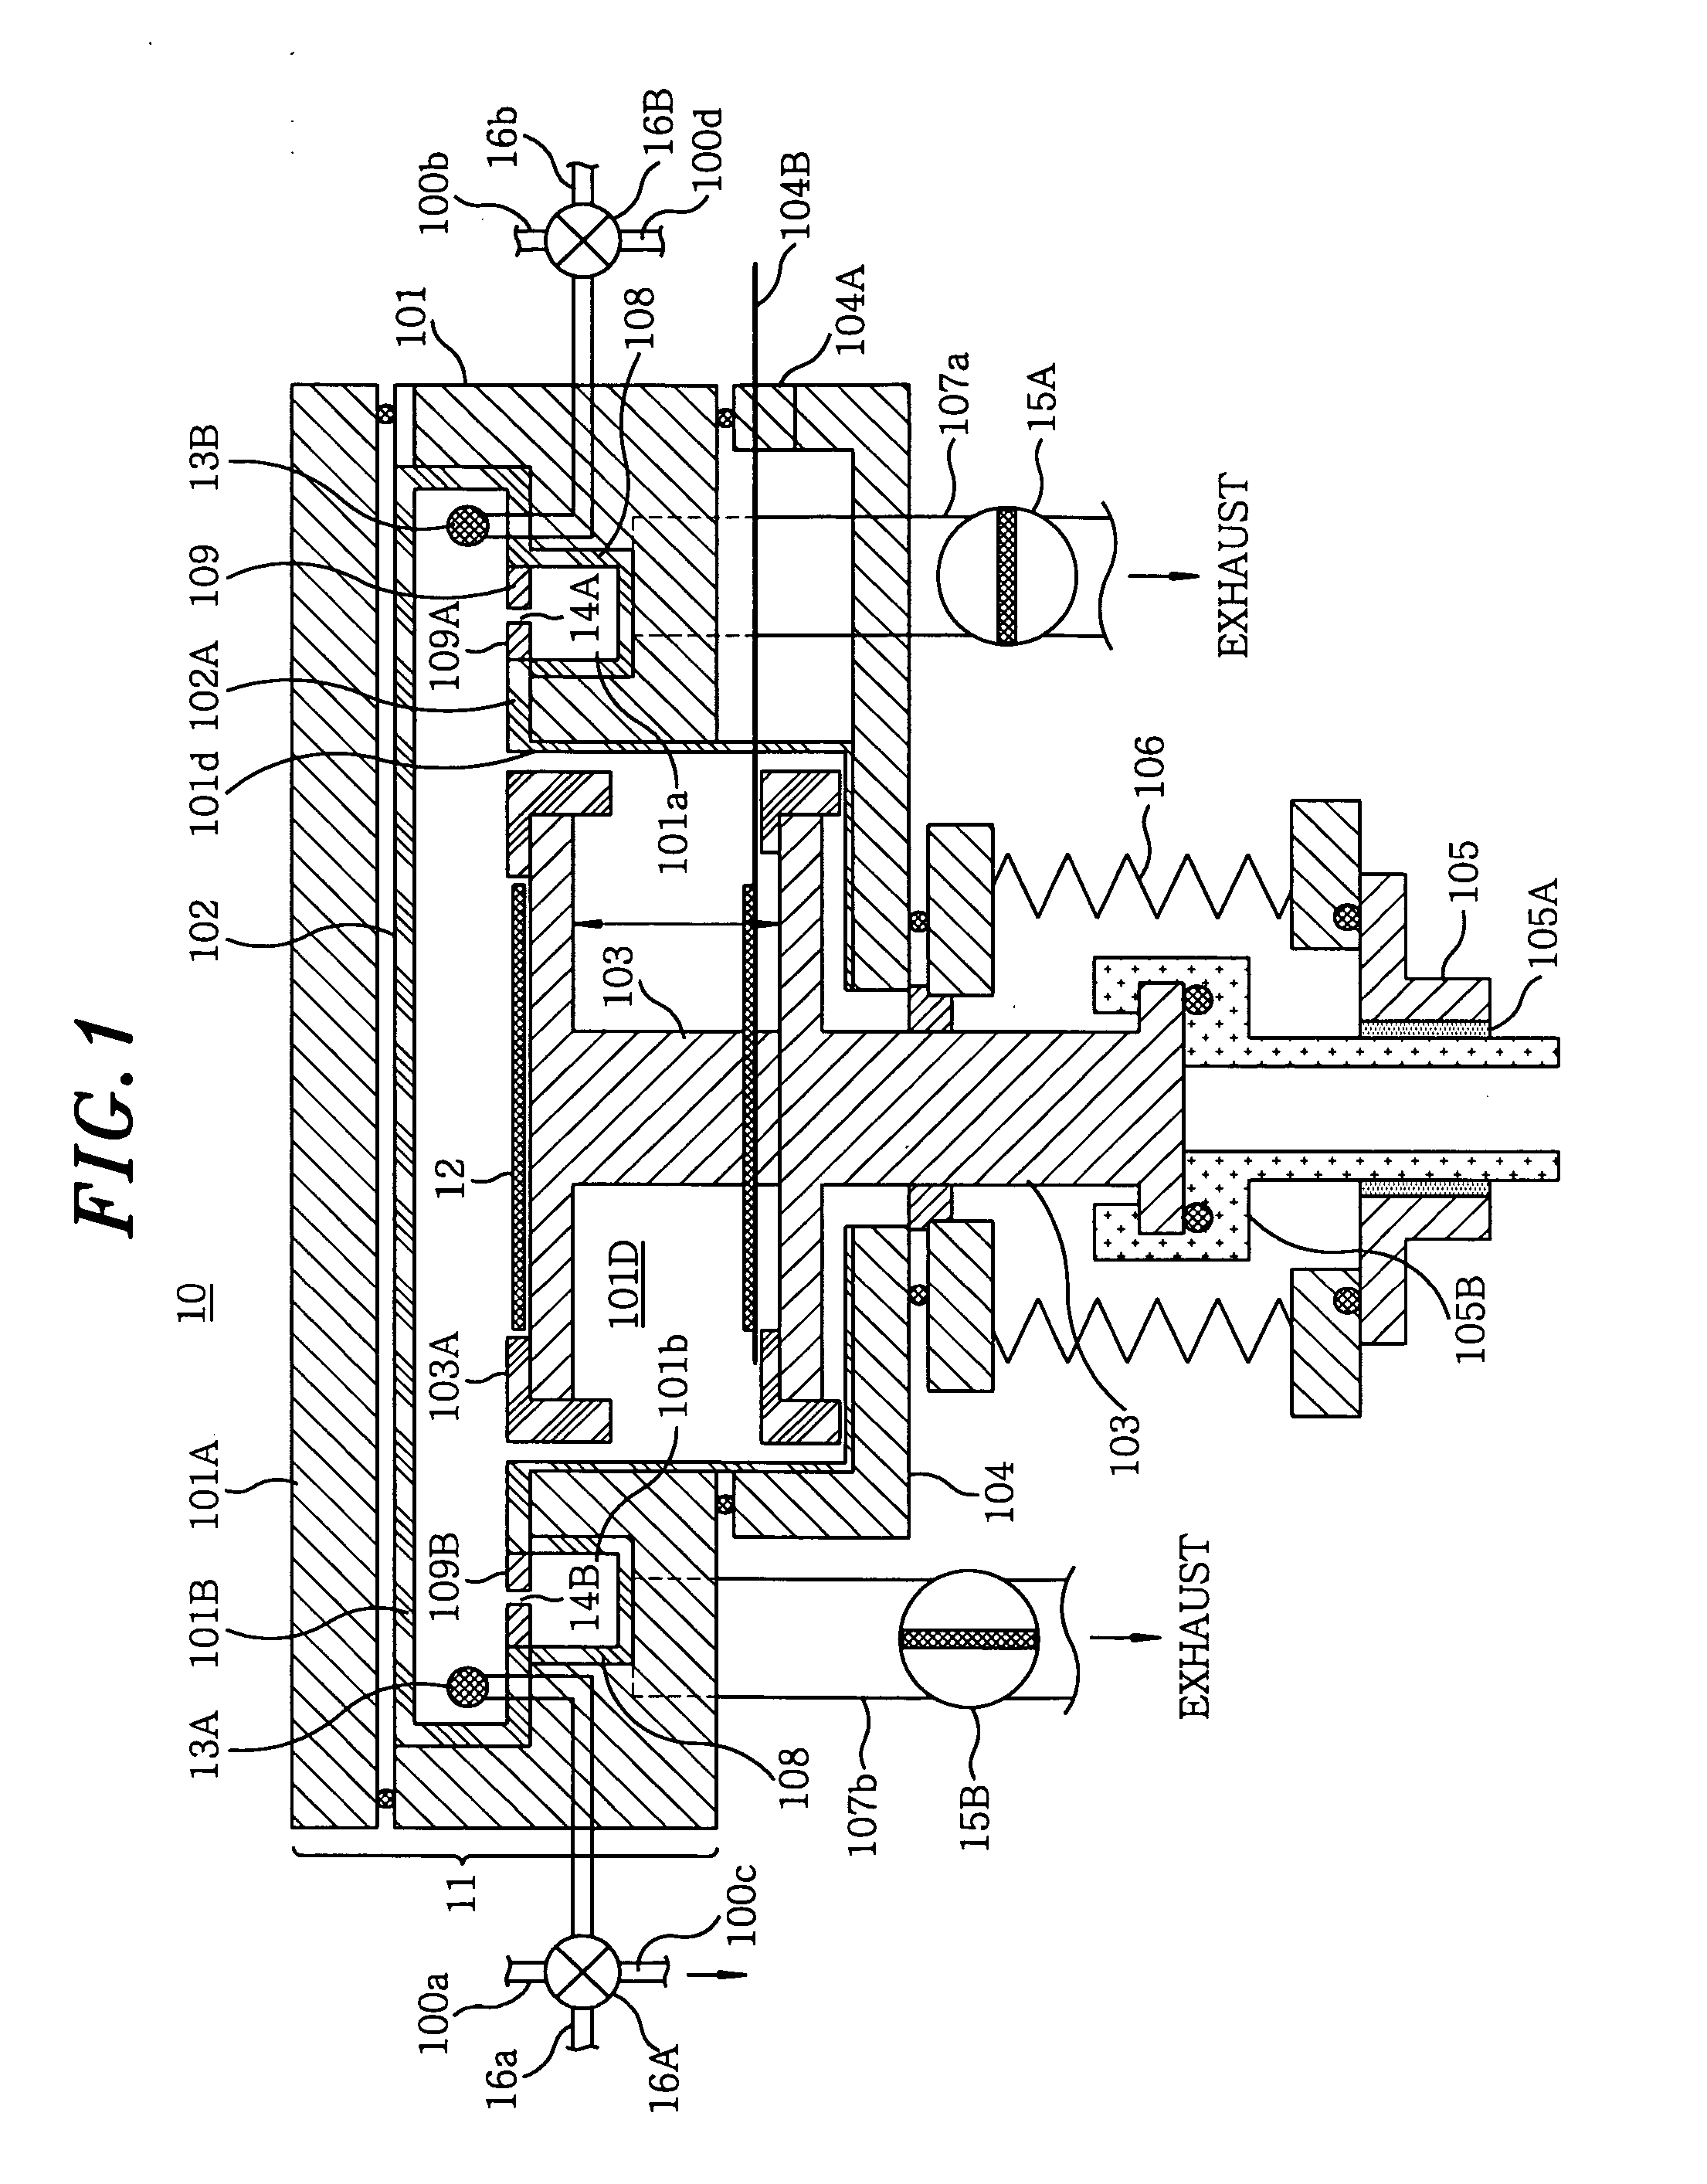 Substrate processing apparatus and method, and gas nozzle for improving purge efficiency